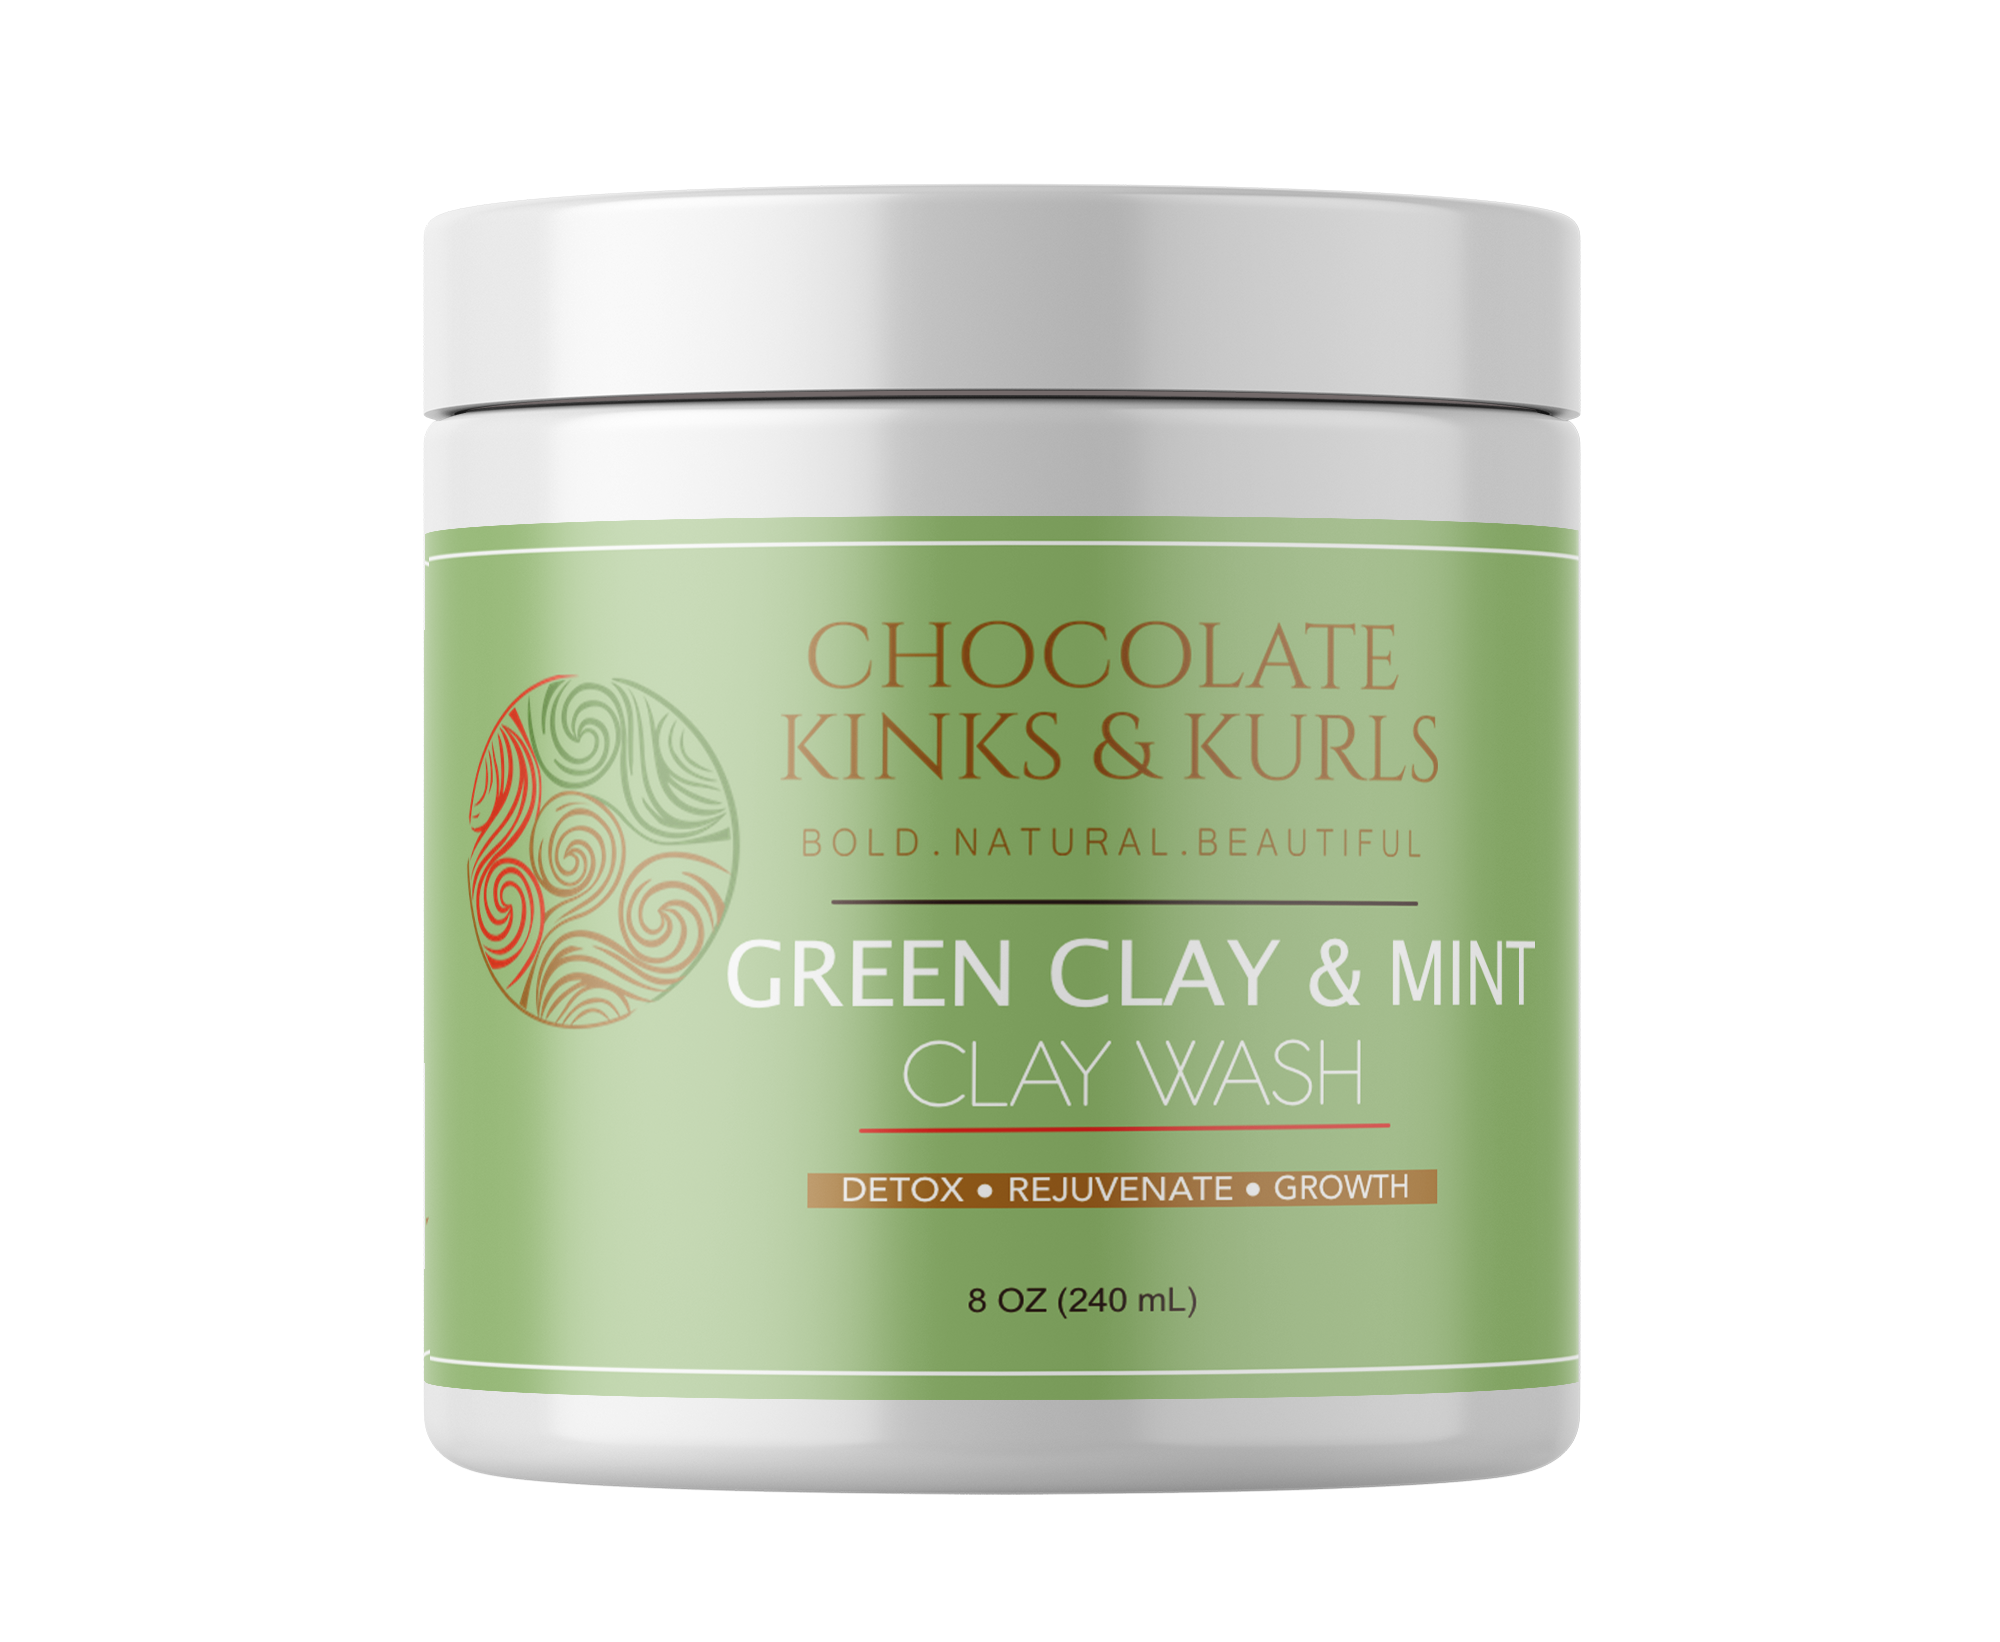 Green Clay & Mint Clay Wash Reimagined